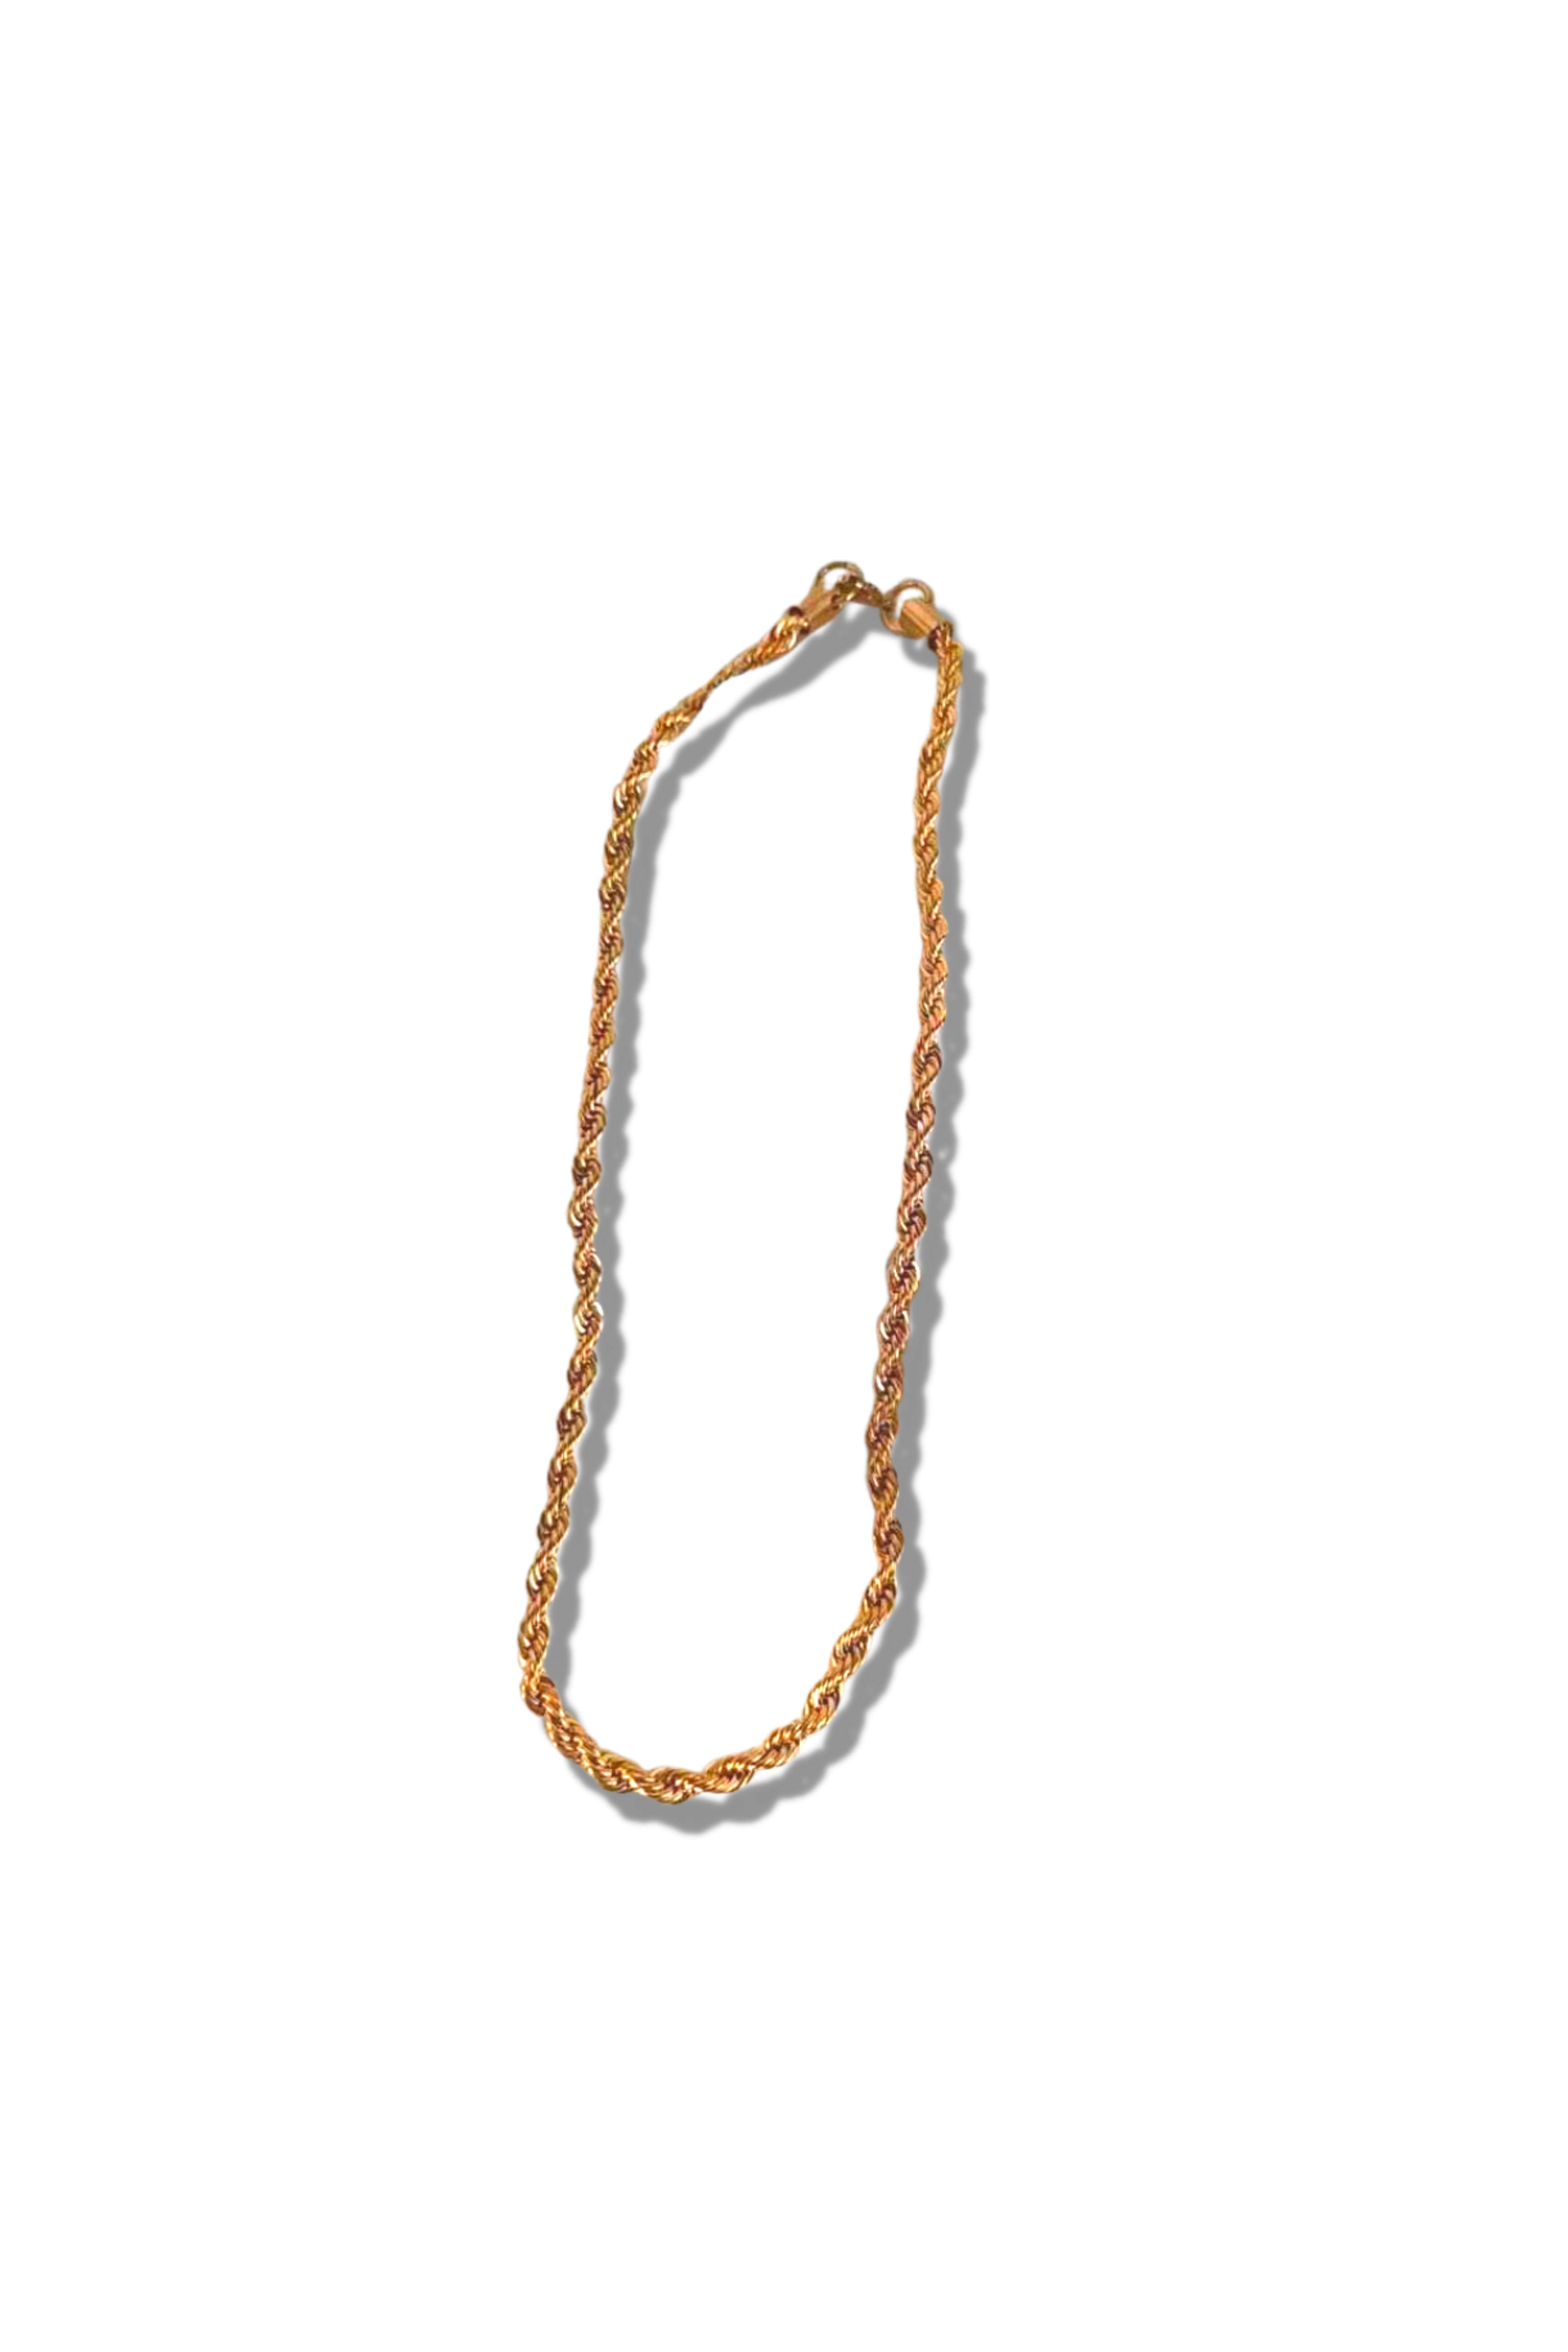 Stainless steel twist chain necklace. The necklace has a hooked clasp. Named "The Toyo" Twist Chain 2.0 by E's Element.